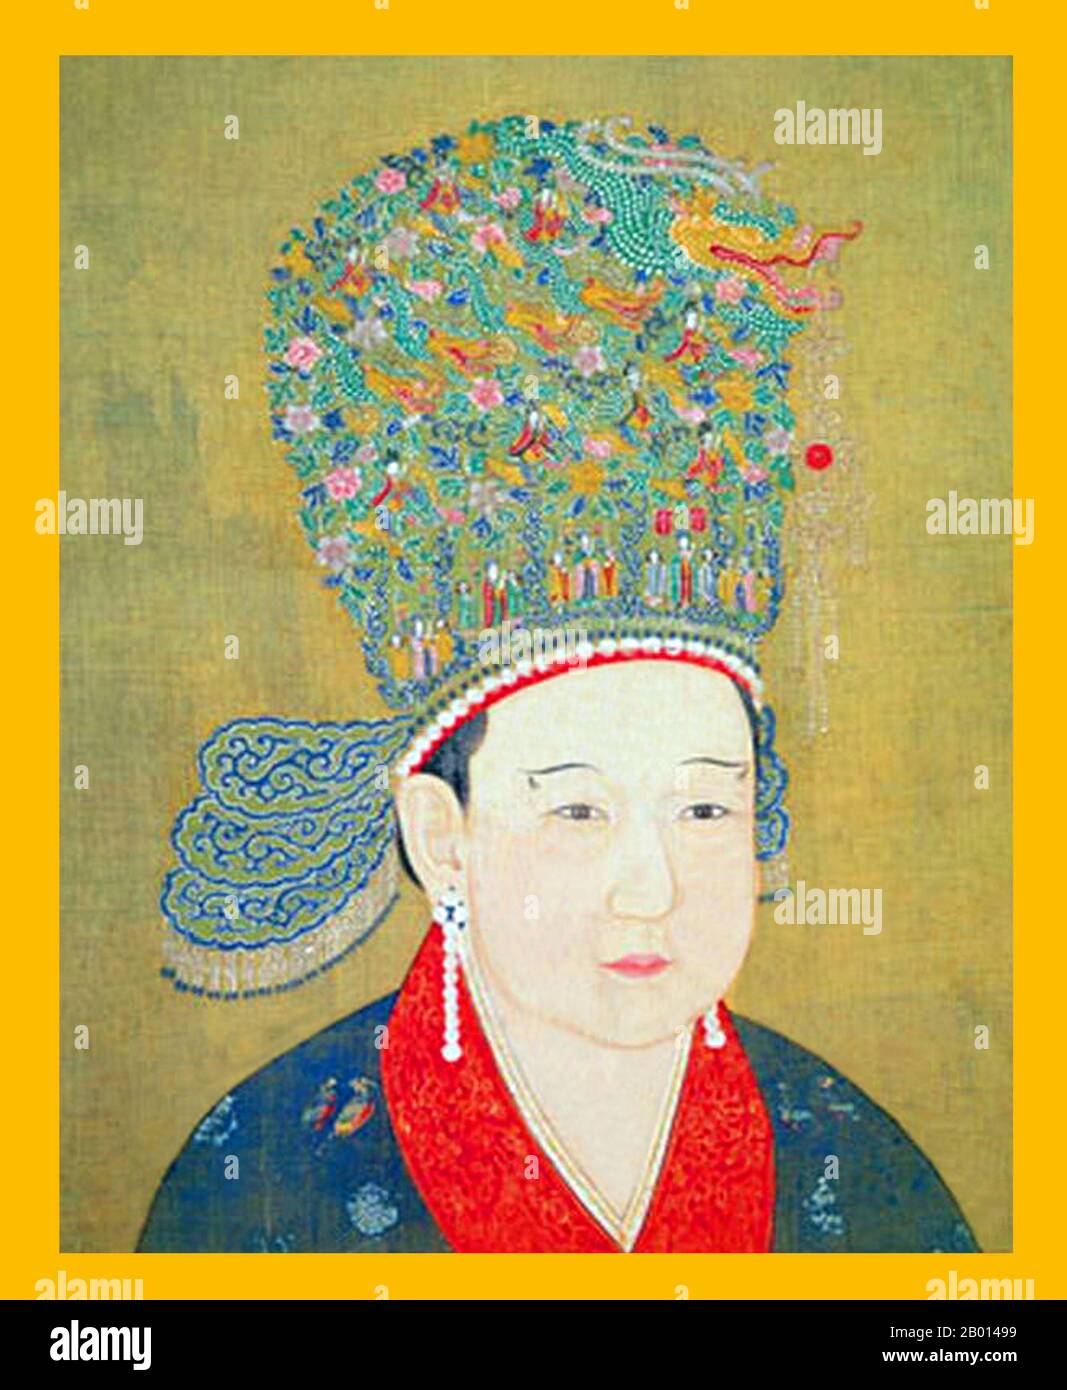 China: Empress Yang (30 June 1162 - 18 January 1233), consort of Emperor Ningzong, 13th ruler of the Song Dynasty and 4th ruler of the Southern Song Synasty (r.1194-1224). Hanging scrol painting, c. 1194-1233.  Empress Yang, formally known as Gongsheng and also known as Yang Meizi, was consort to Emperor Ningzong. She succeeded Empress Han and was known for her ambition and cunning, working alongside her ally Shi Miyuan, who became grand chancellor. She served as co-regent of Emperor Lizong until her death. She is considered 'one of the most powerful empresses of the Song Dynasty.' Stock Photo